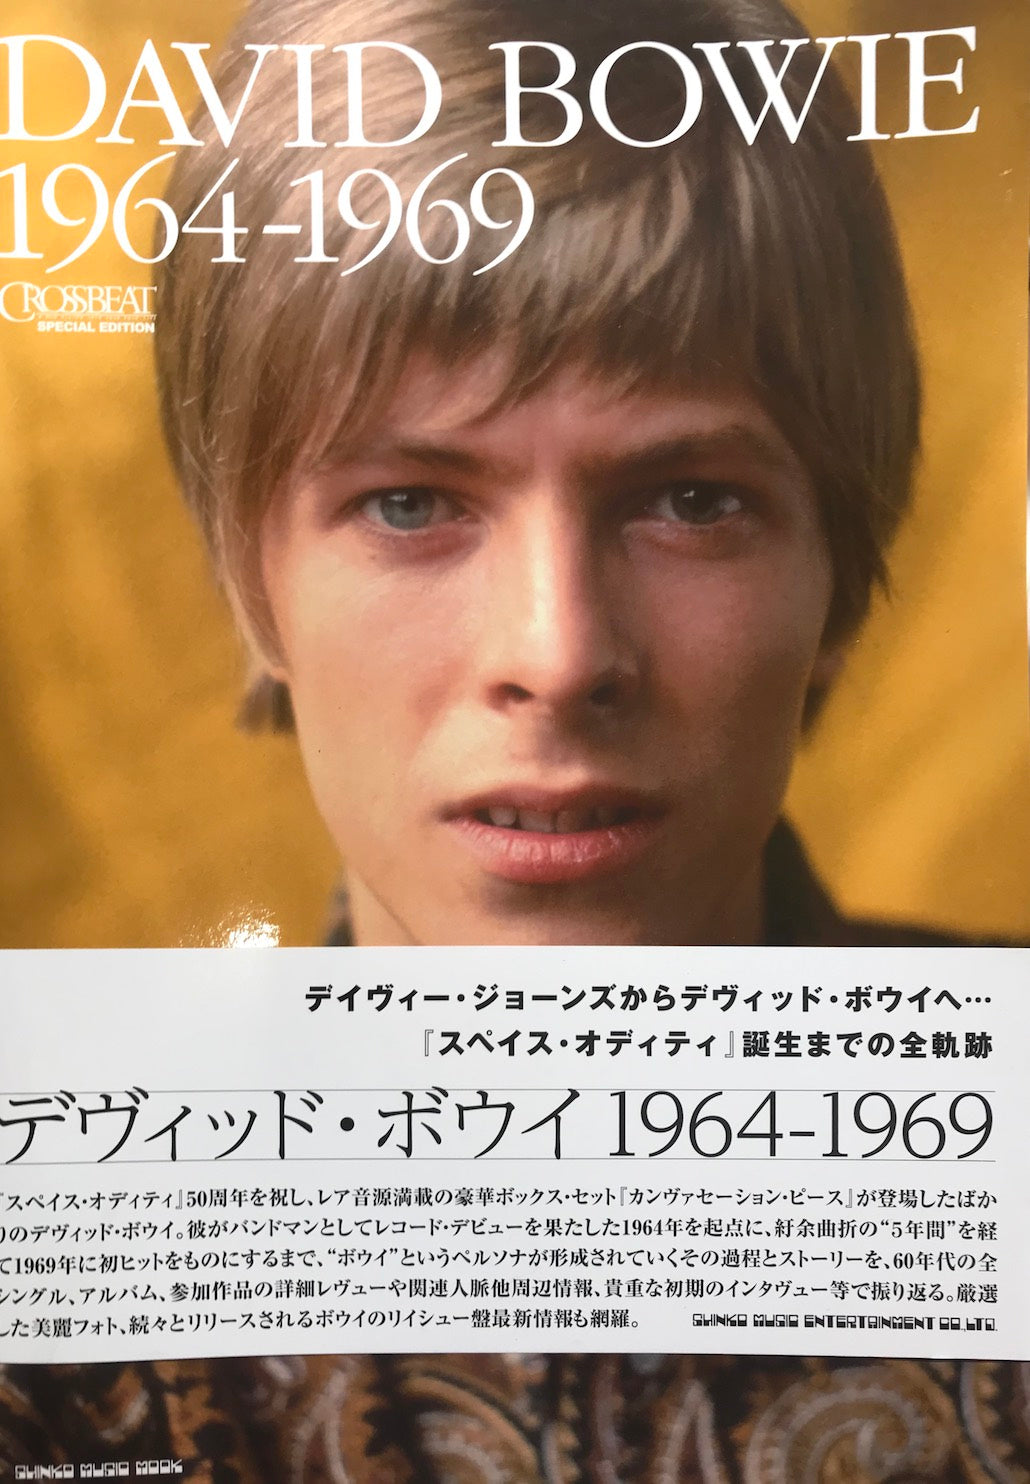 CROSSBEAT Special Edition  David Bowie デヴィッド・ボウイ 1964-1969